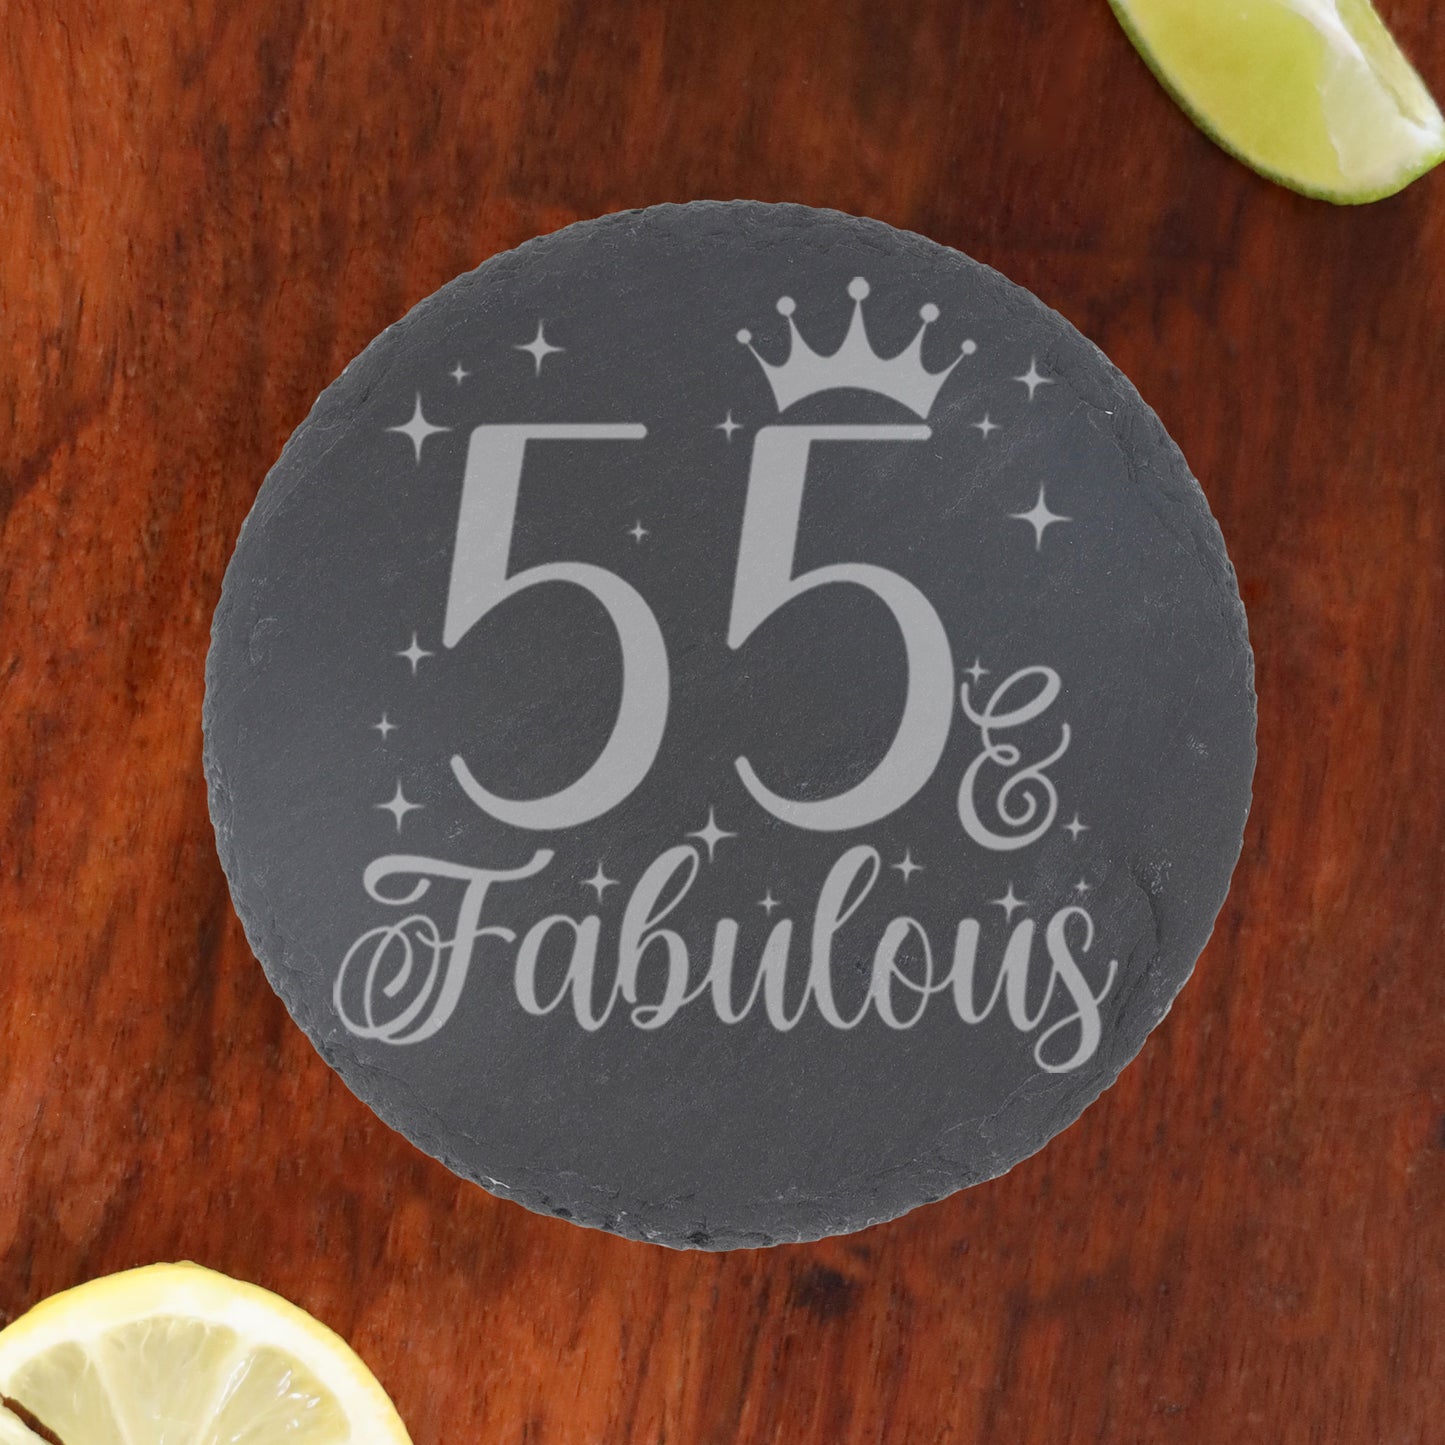 55 & Fabulous Engraved Stemless Gin Glass and/or Coaster Set  - Always Looking Good - Round Coaster On Its Own  